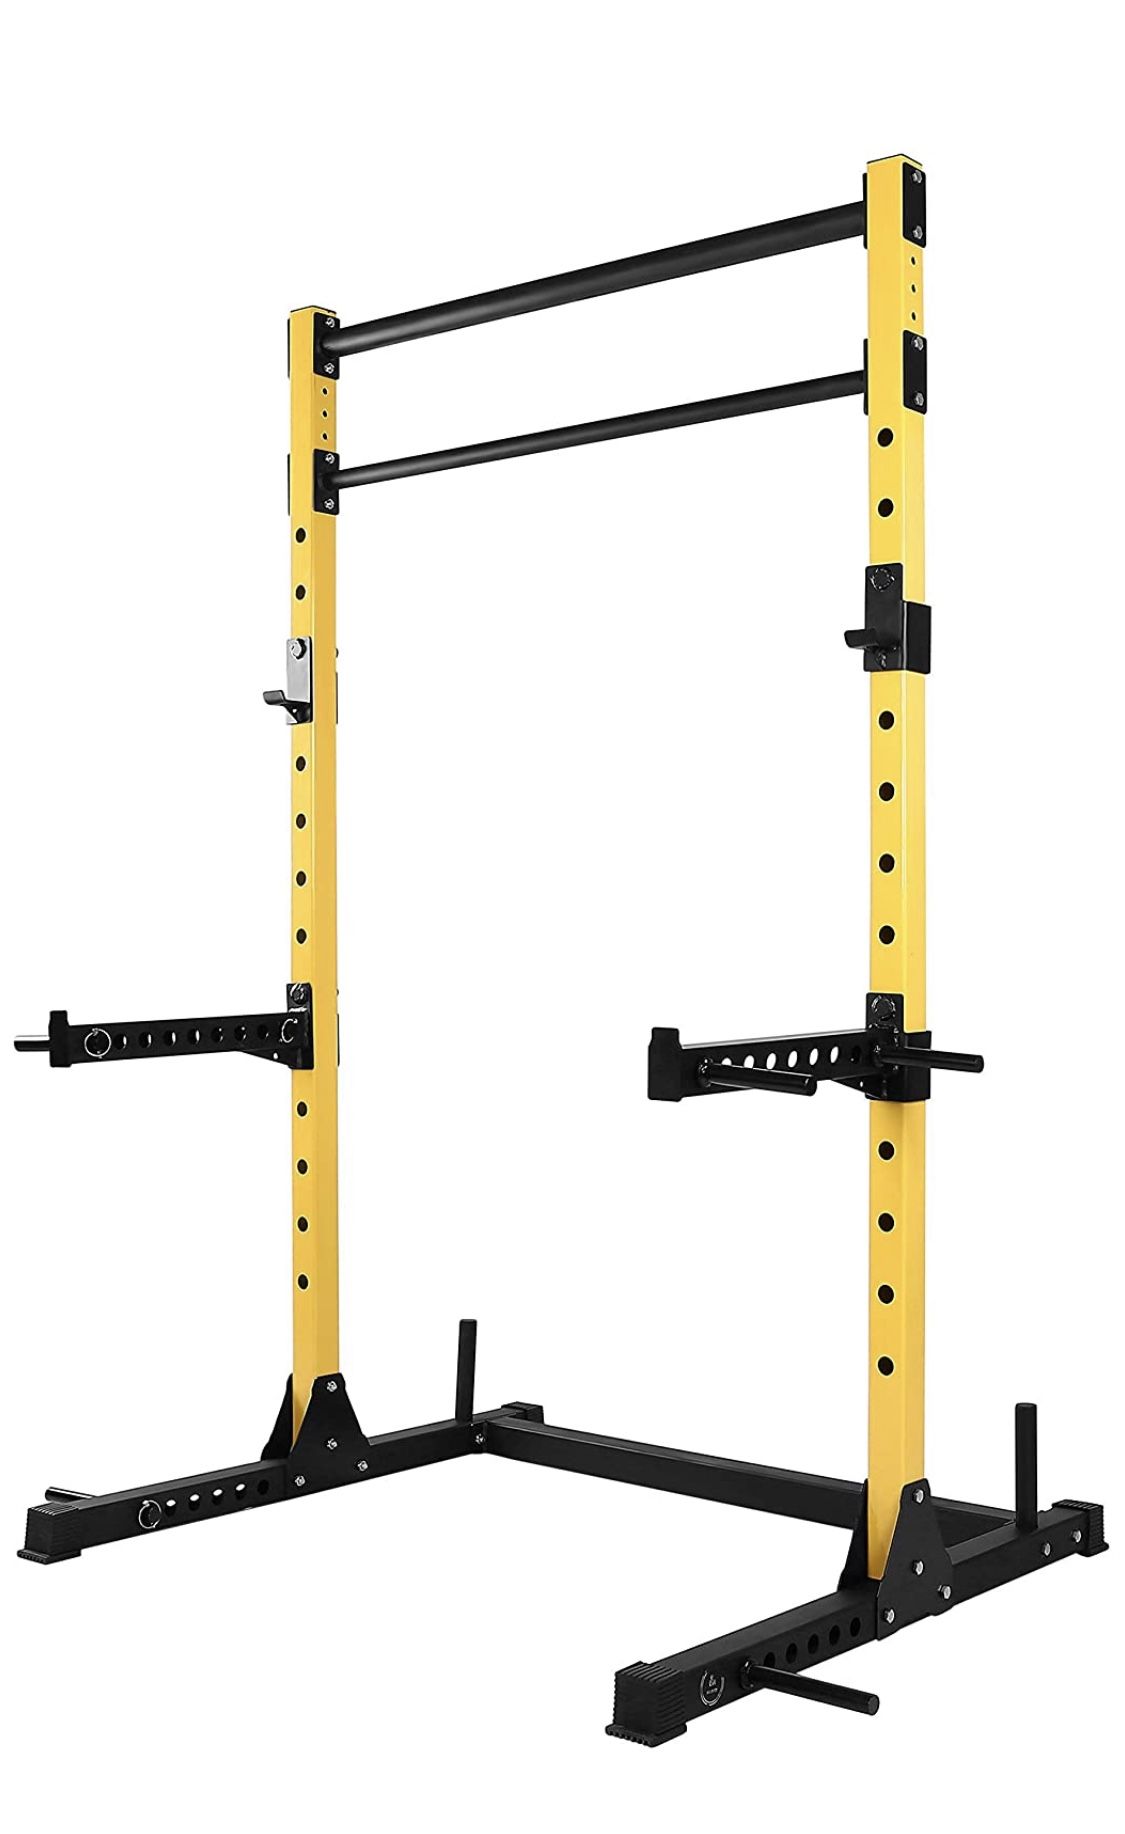 HulkFit Multi-Function Adjustable Power Rack Exercise Squat Stand